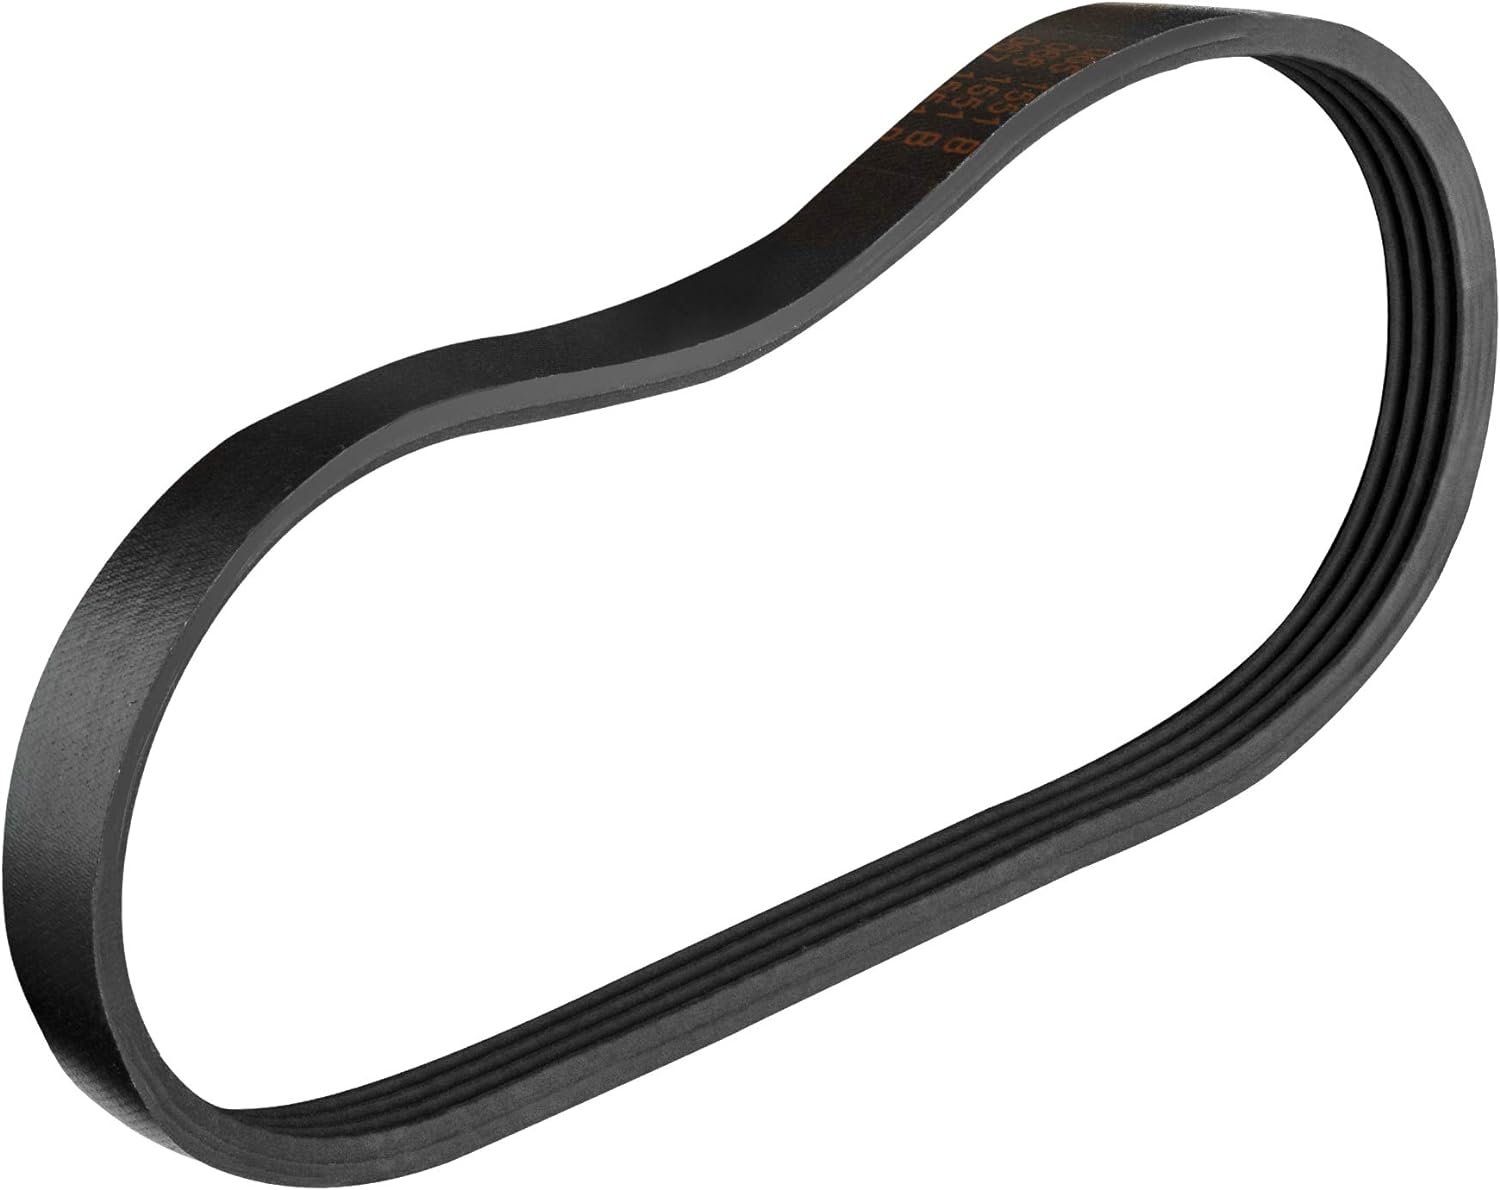 DNLK Band Saw Drive Belt Fits - Sears Craftsman 29502.00 Band Saw - High Strength Rubber Belt - Replacement Drive Belt - Made in the